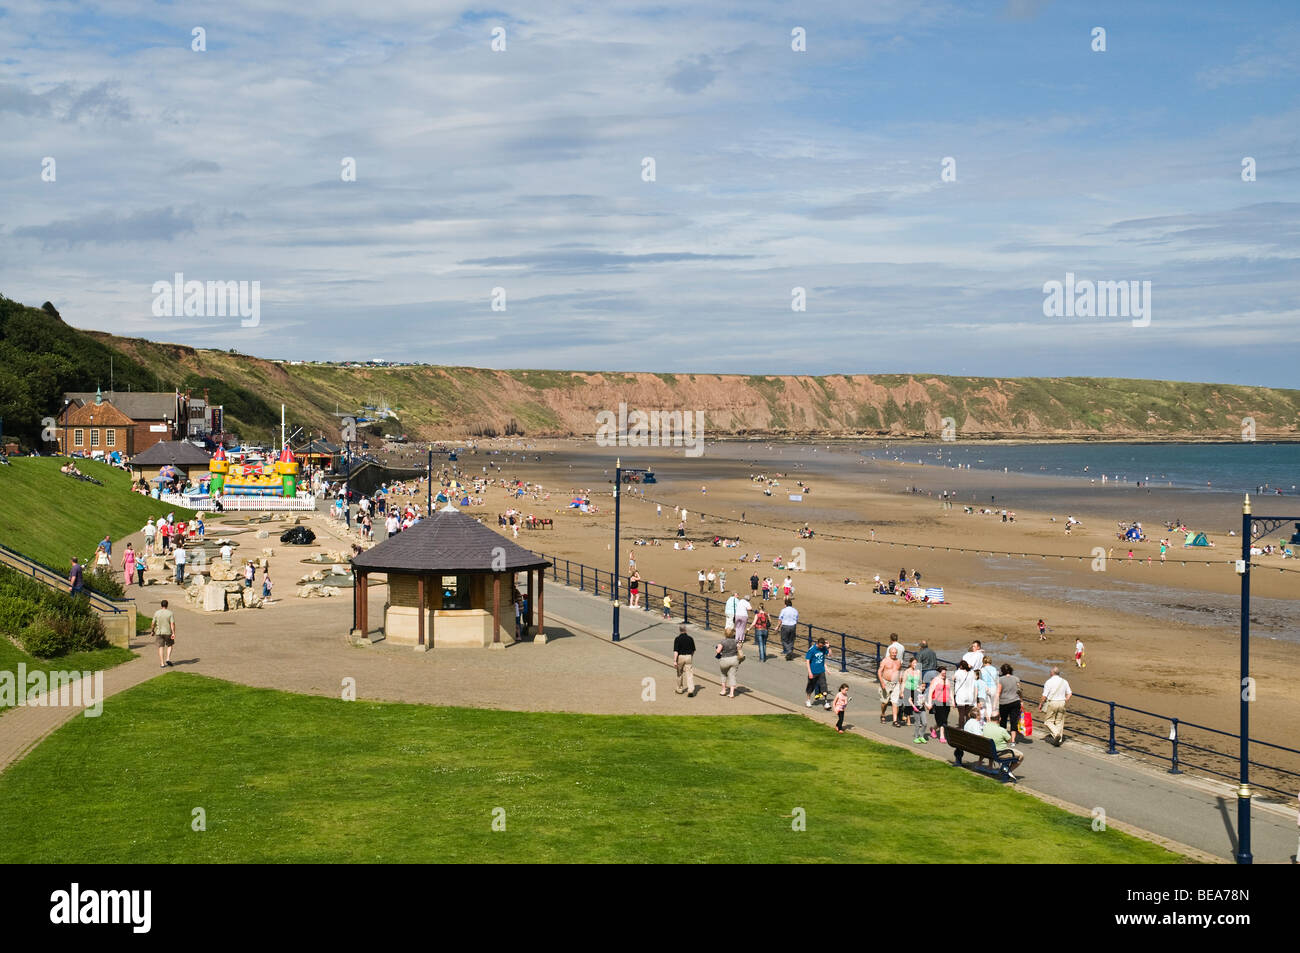 Dh Filey lungomare FILEY North Yorkshire vacanzieri holiday resort seasides uk english seaside beach Foto Stock